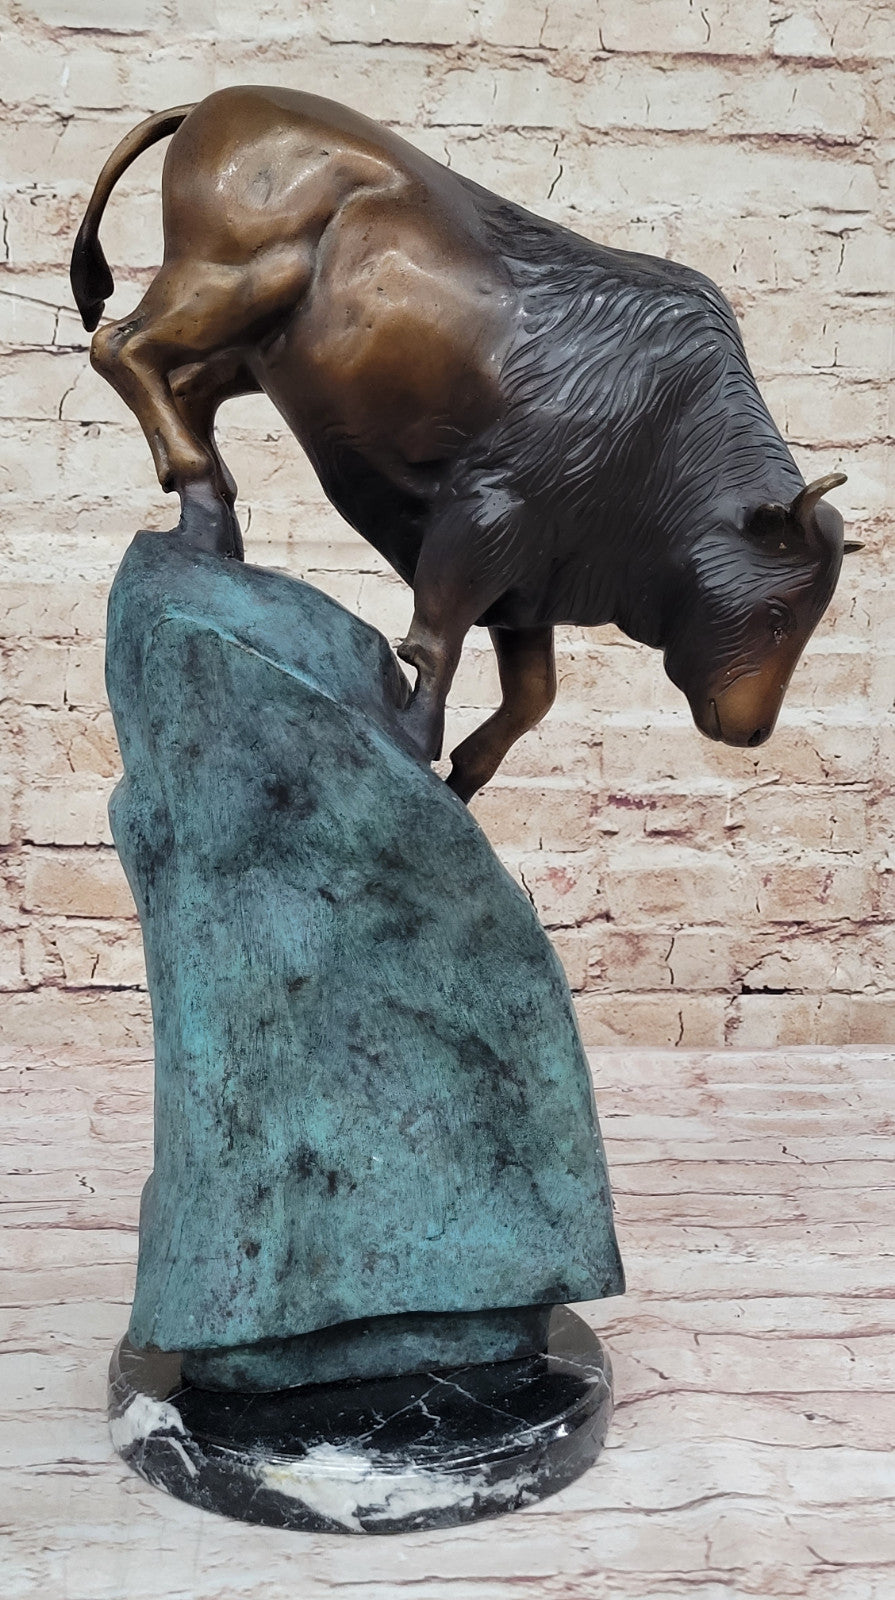 Signed Limited Edition by Marius: Bison Water Buffalo Bronze Sculpture